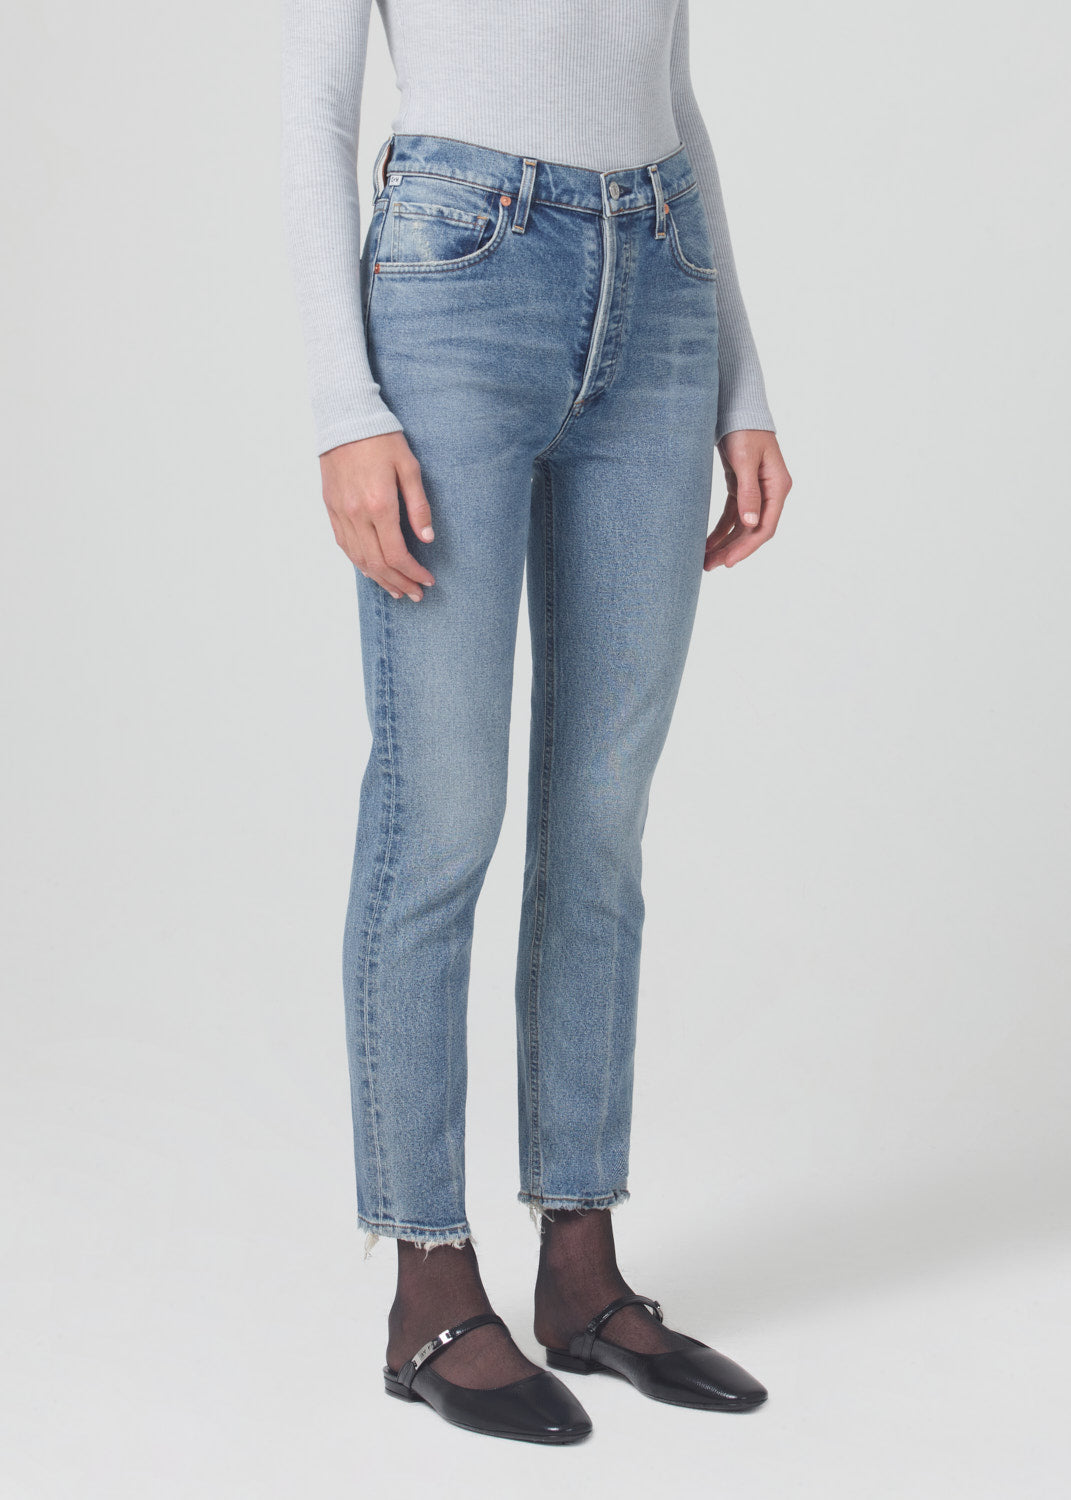 citizens of humanity high rise straight jeans in dimple front